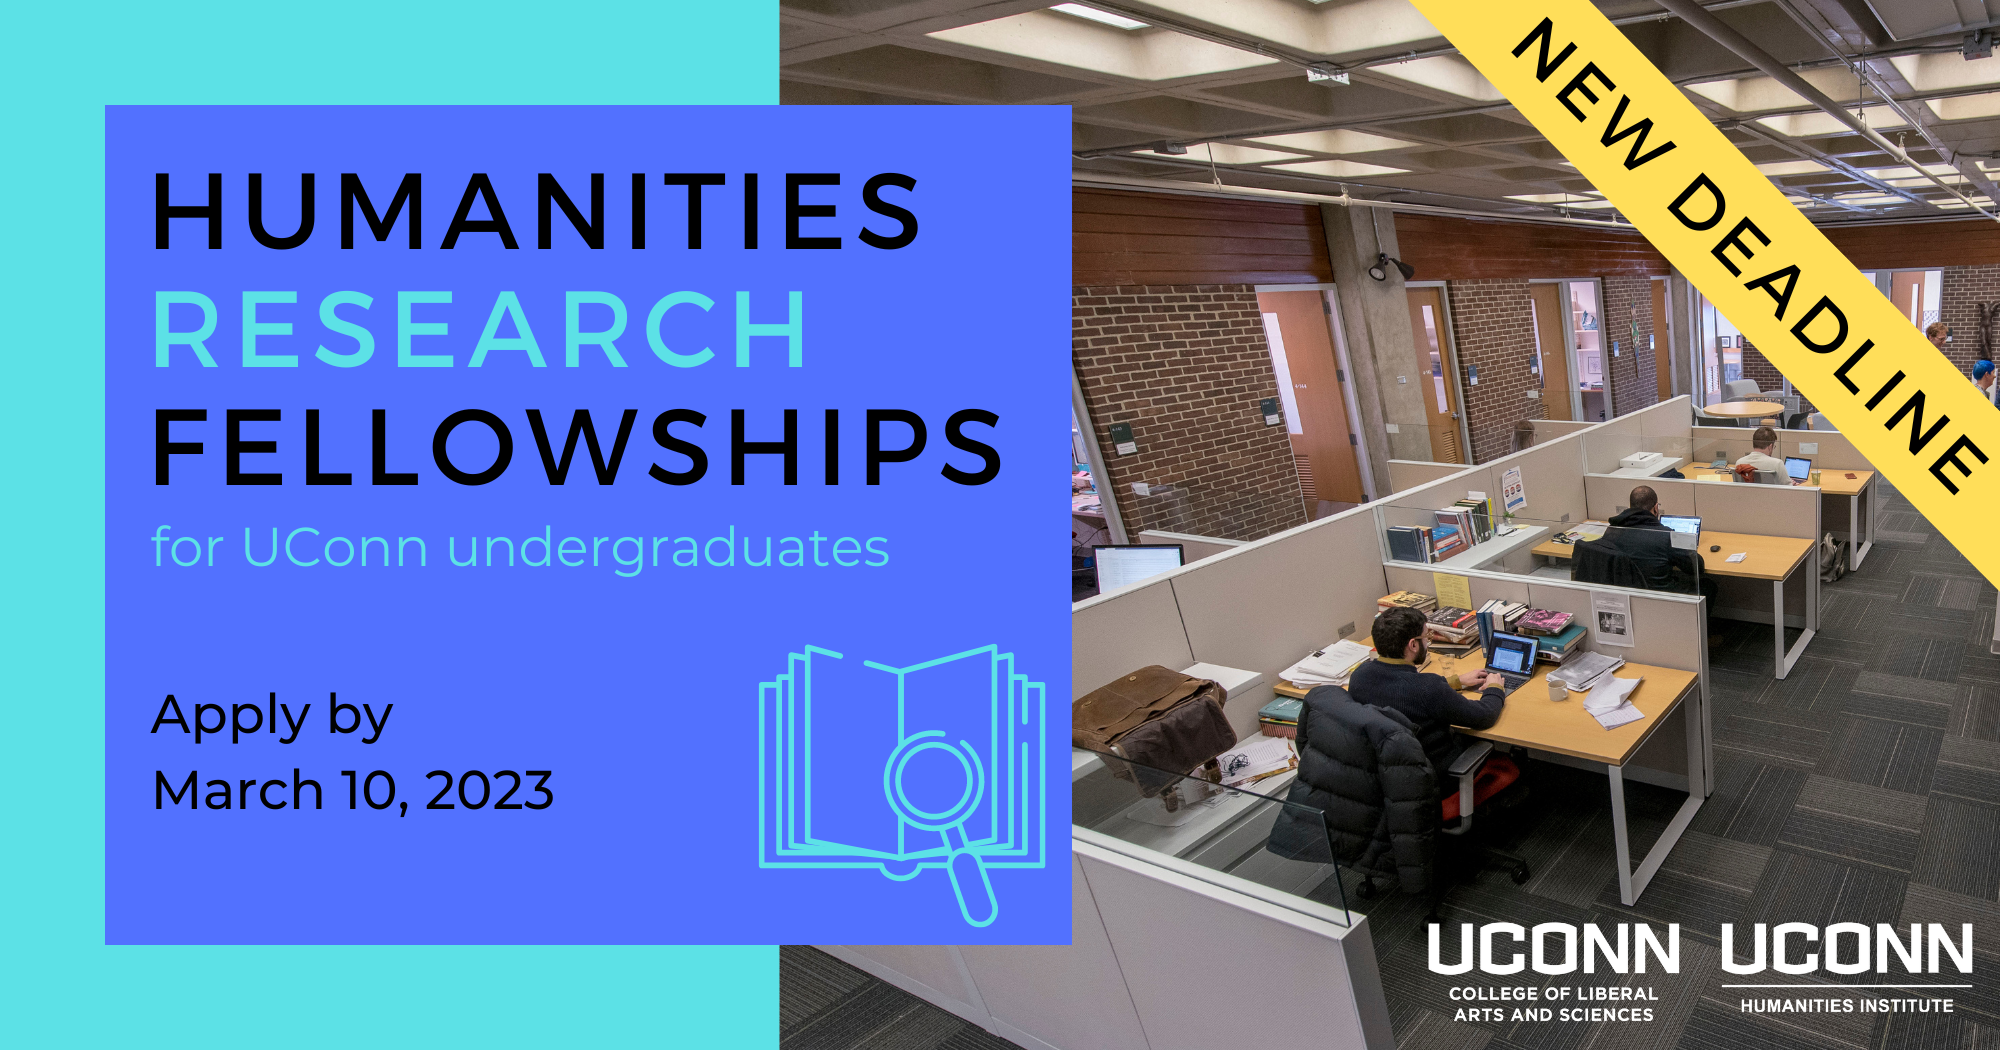 NEW DEADLINE: Humanities research fellowships for UConn undergraduates. Apply by March 10, 2023.